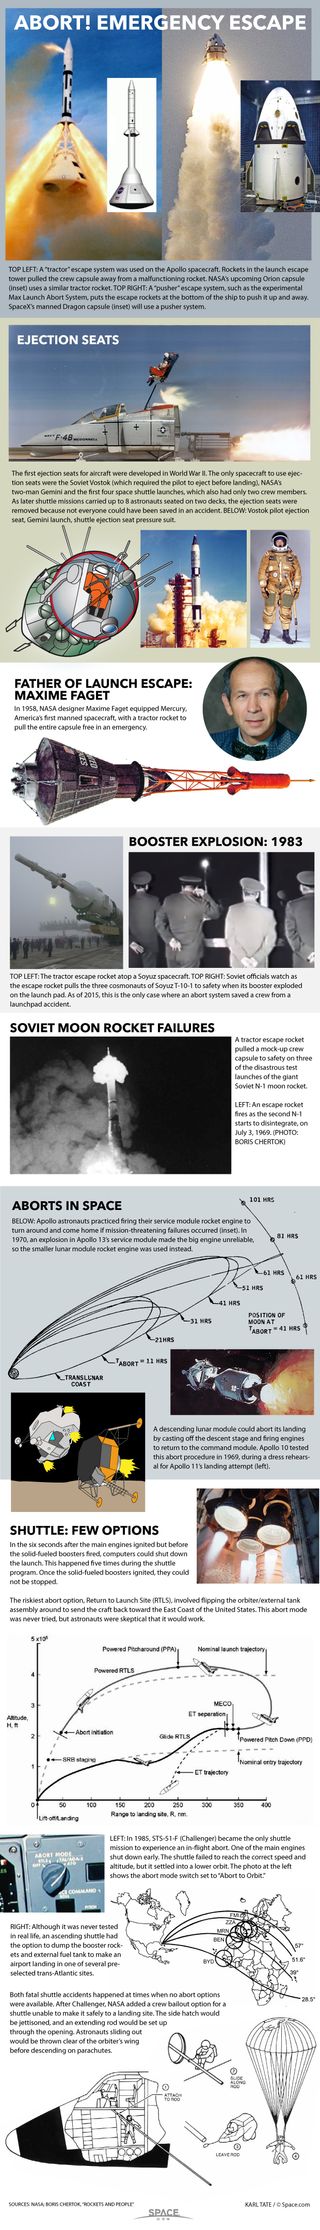 Chart shows methods of aborting space missions.